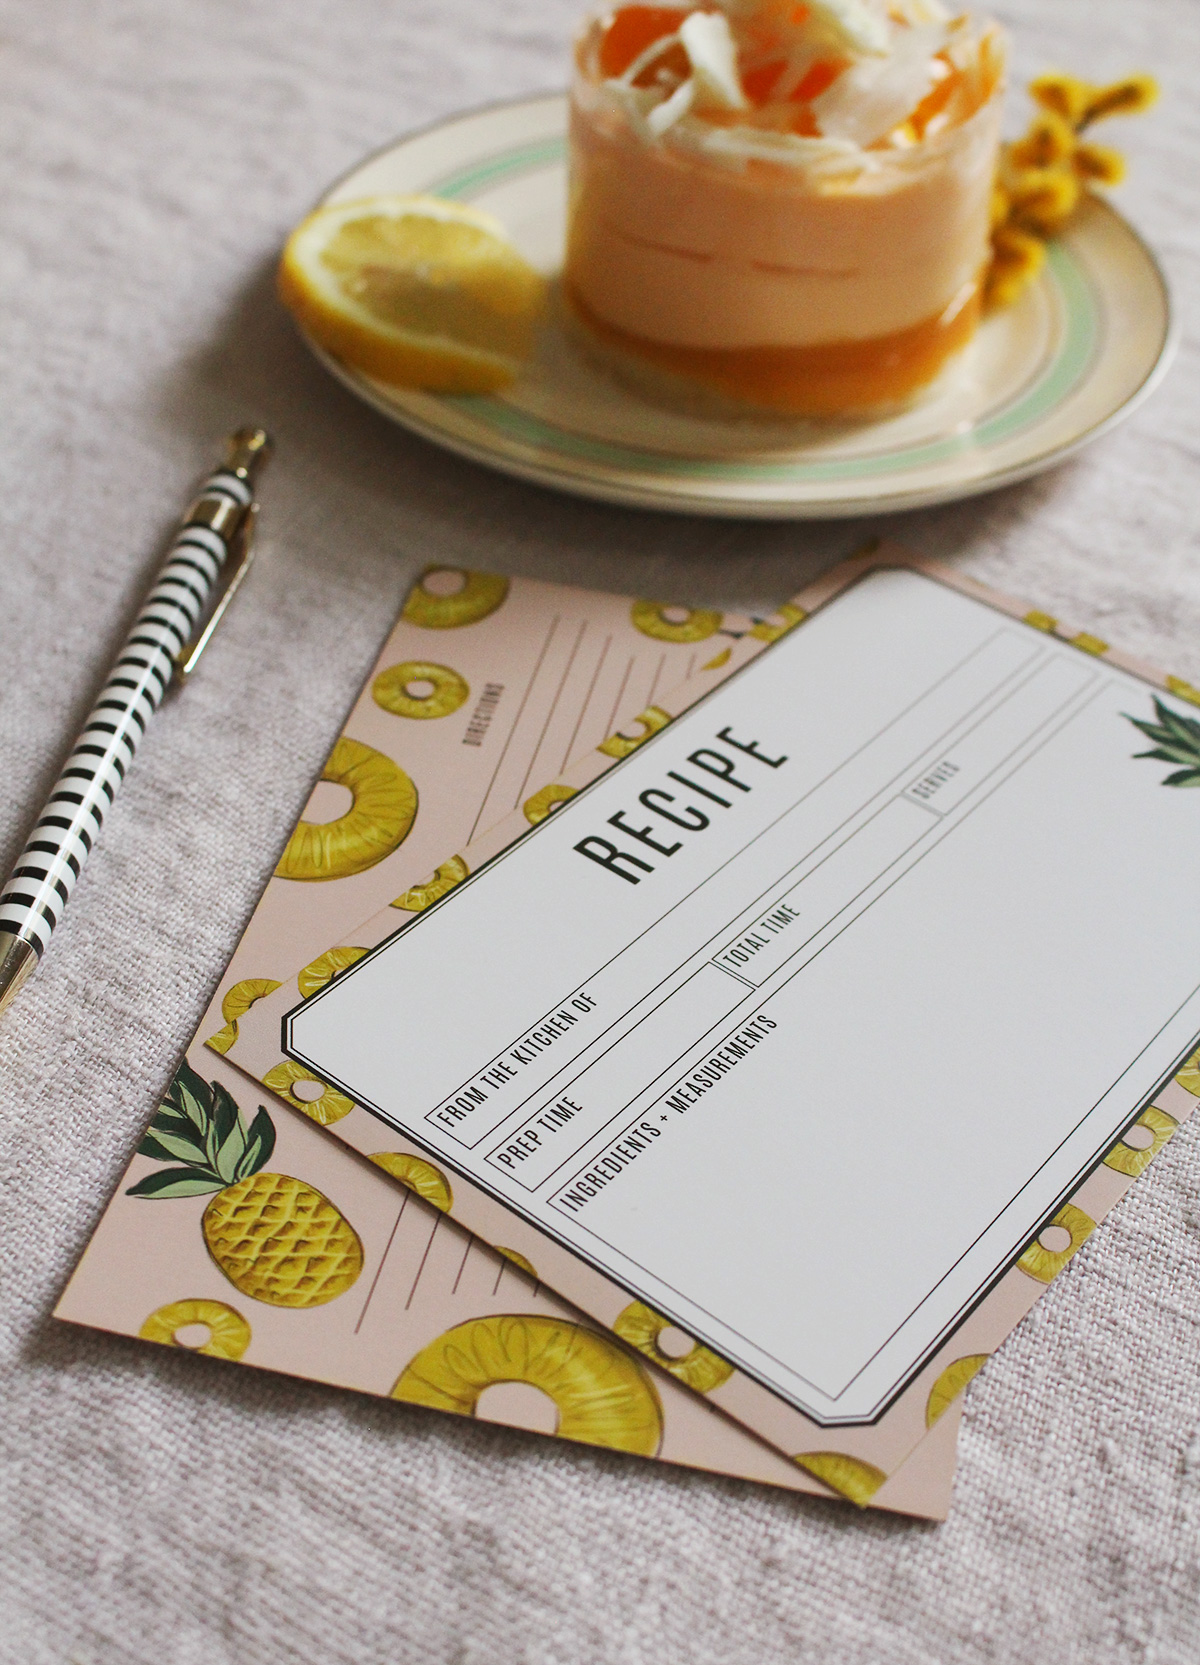 Make your recipes look cute with these adorable recipe cards